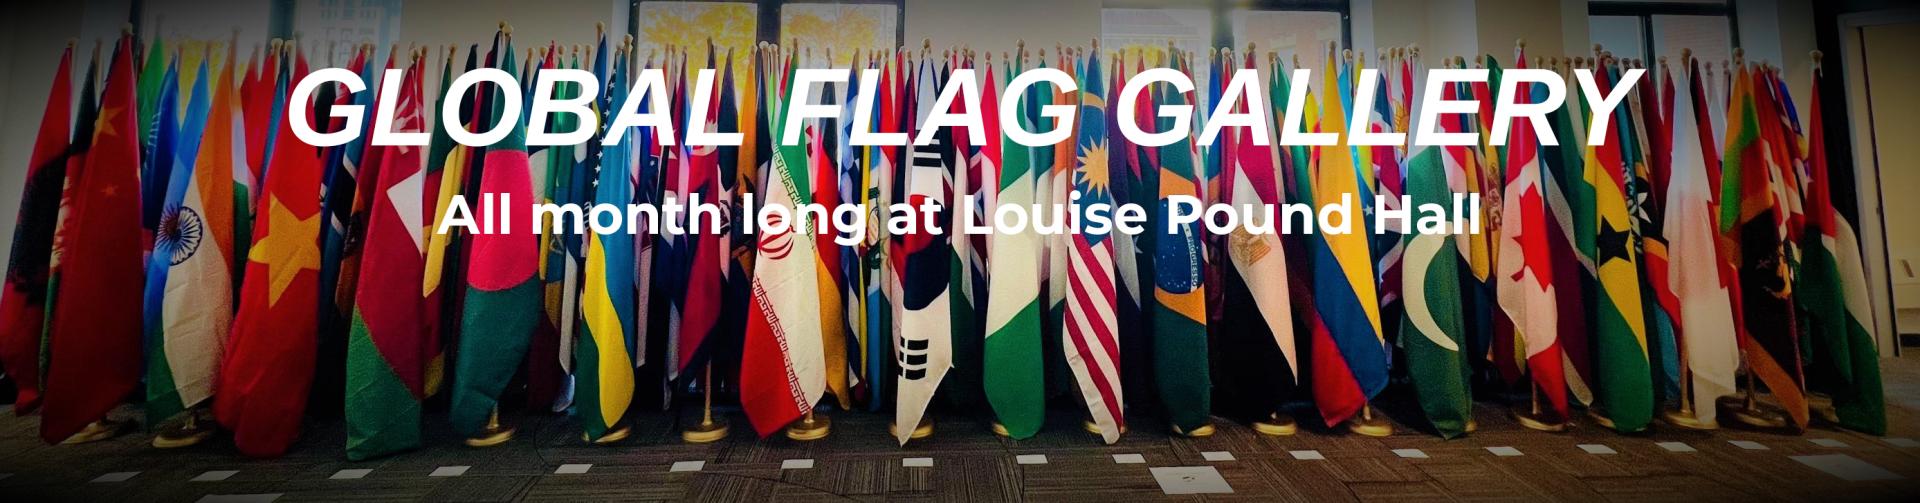 Global Flag Gallery all month long at Louise Pound Hall